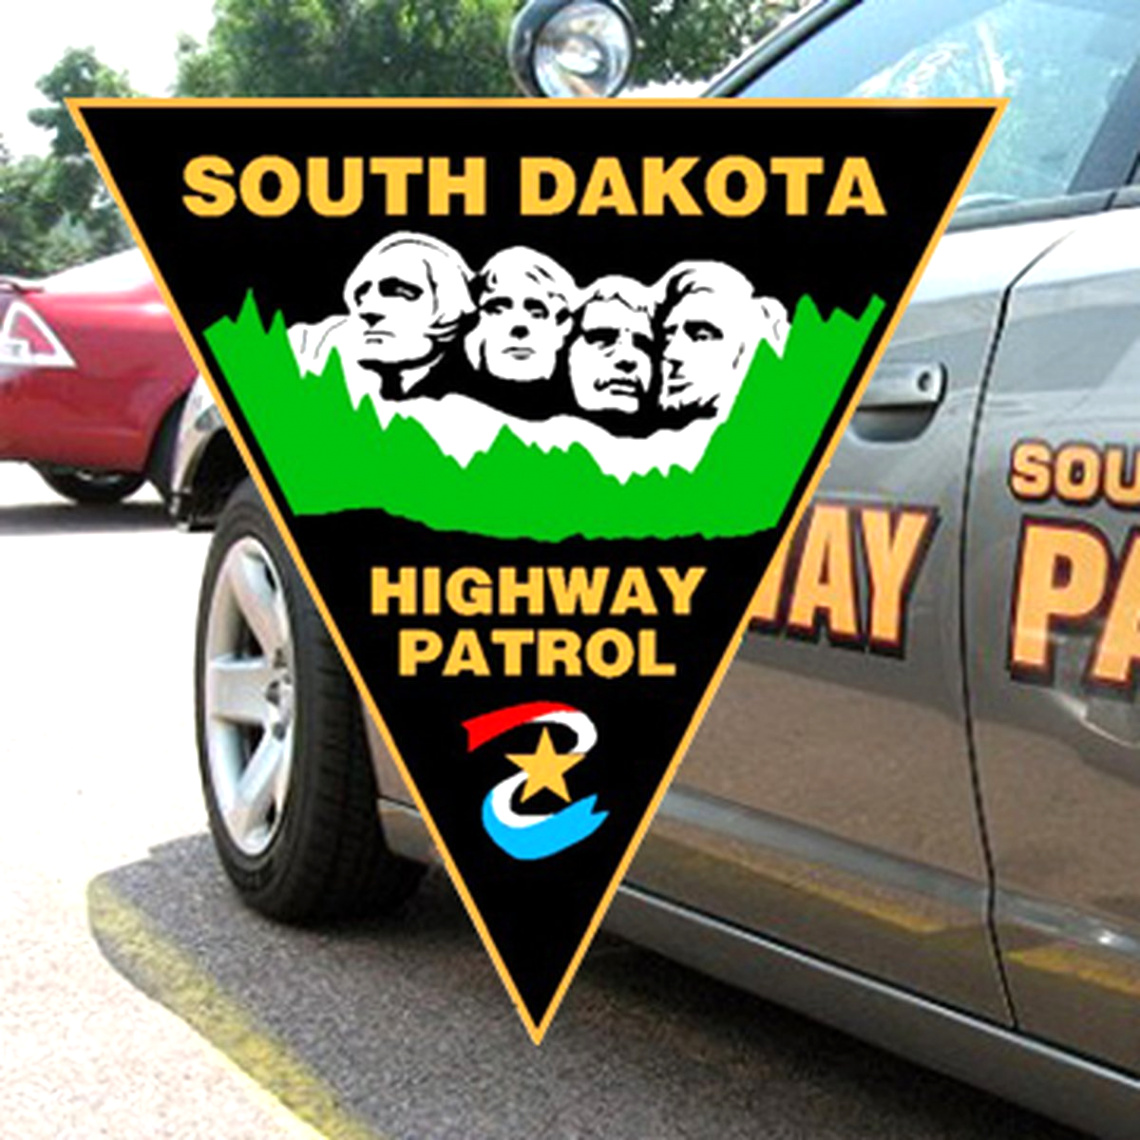 Car Accident Lawyer In Beadle Sd Dans sobriety Checkpoints Planned for Parts Of south Dakota In July ...